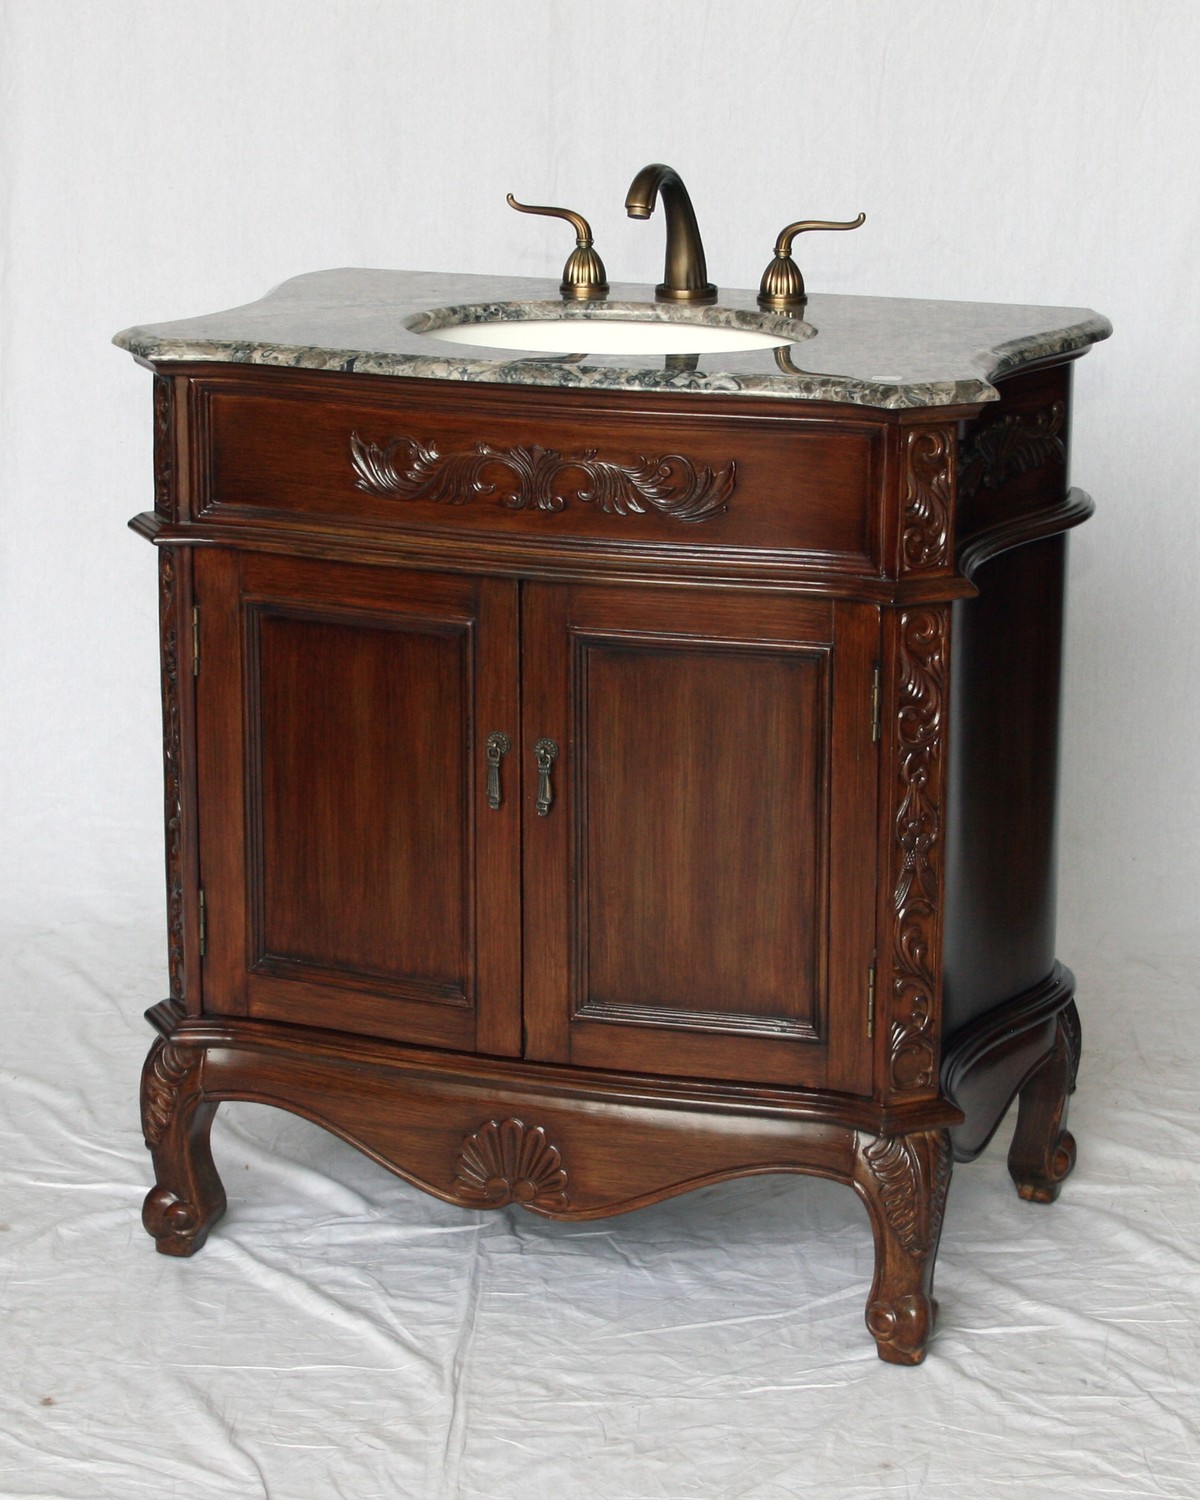 34" Adelina Antique Style Single Sink Bathroom Vanity with Gray Granite Countertop and Walnut Finish